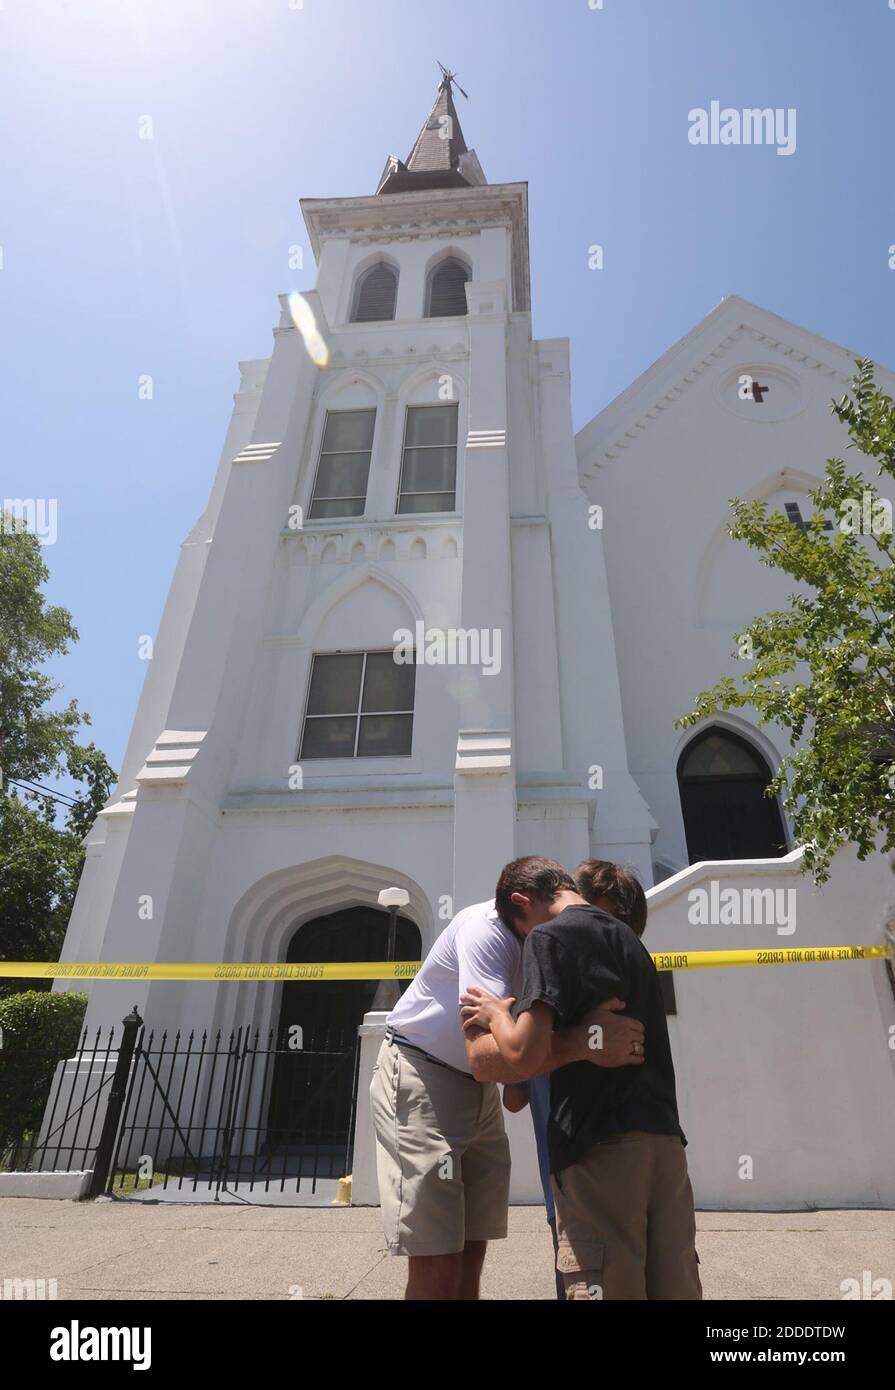 NO FILM, NO VIDEO, NO TV, NO DOCUMENTARY - Aaron Eller and his boys, Leim and Graham, pray in front of Emanuel AME Church on June 18, 2015 in Charleston, SC, USA., where a gunman killed nine people inside. Photo by Tim Dominick/The State/TNS/ABACAPRESS.COM Stock Photo